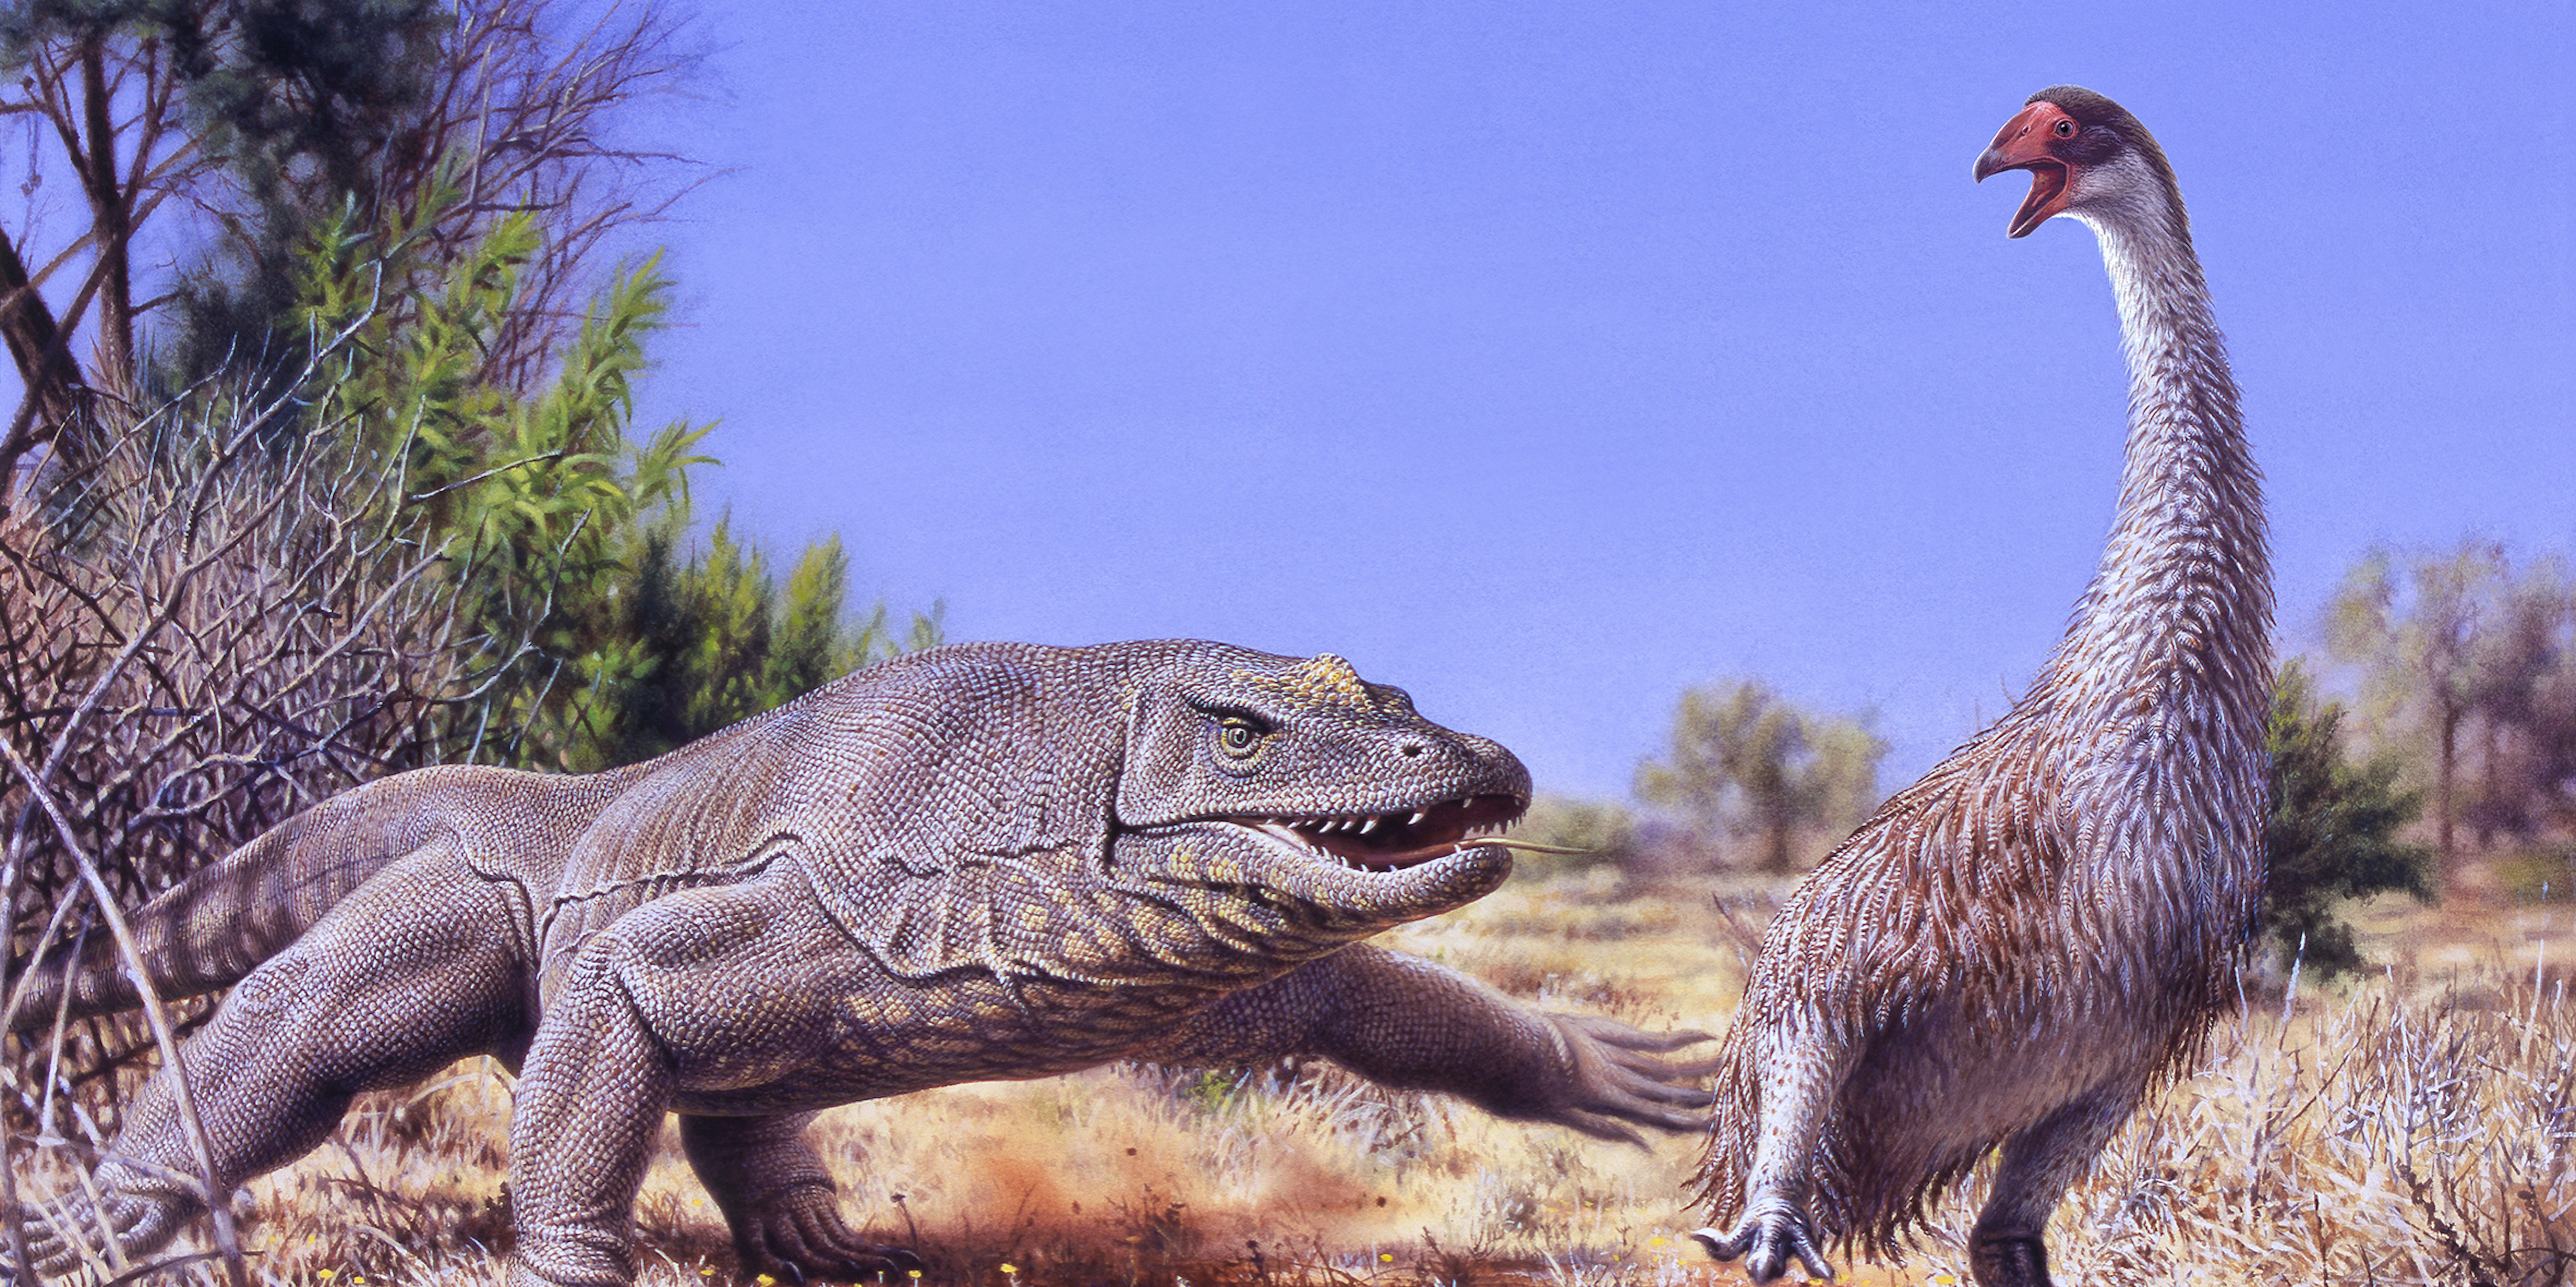  An illustration of Genyornis newtoni, an extinct Australian bird that resembled a goose, being chased by a monitor lizard.